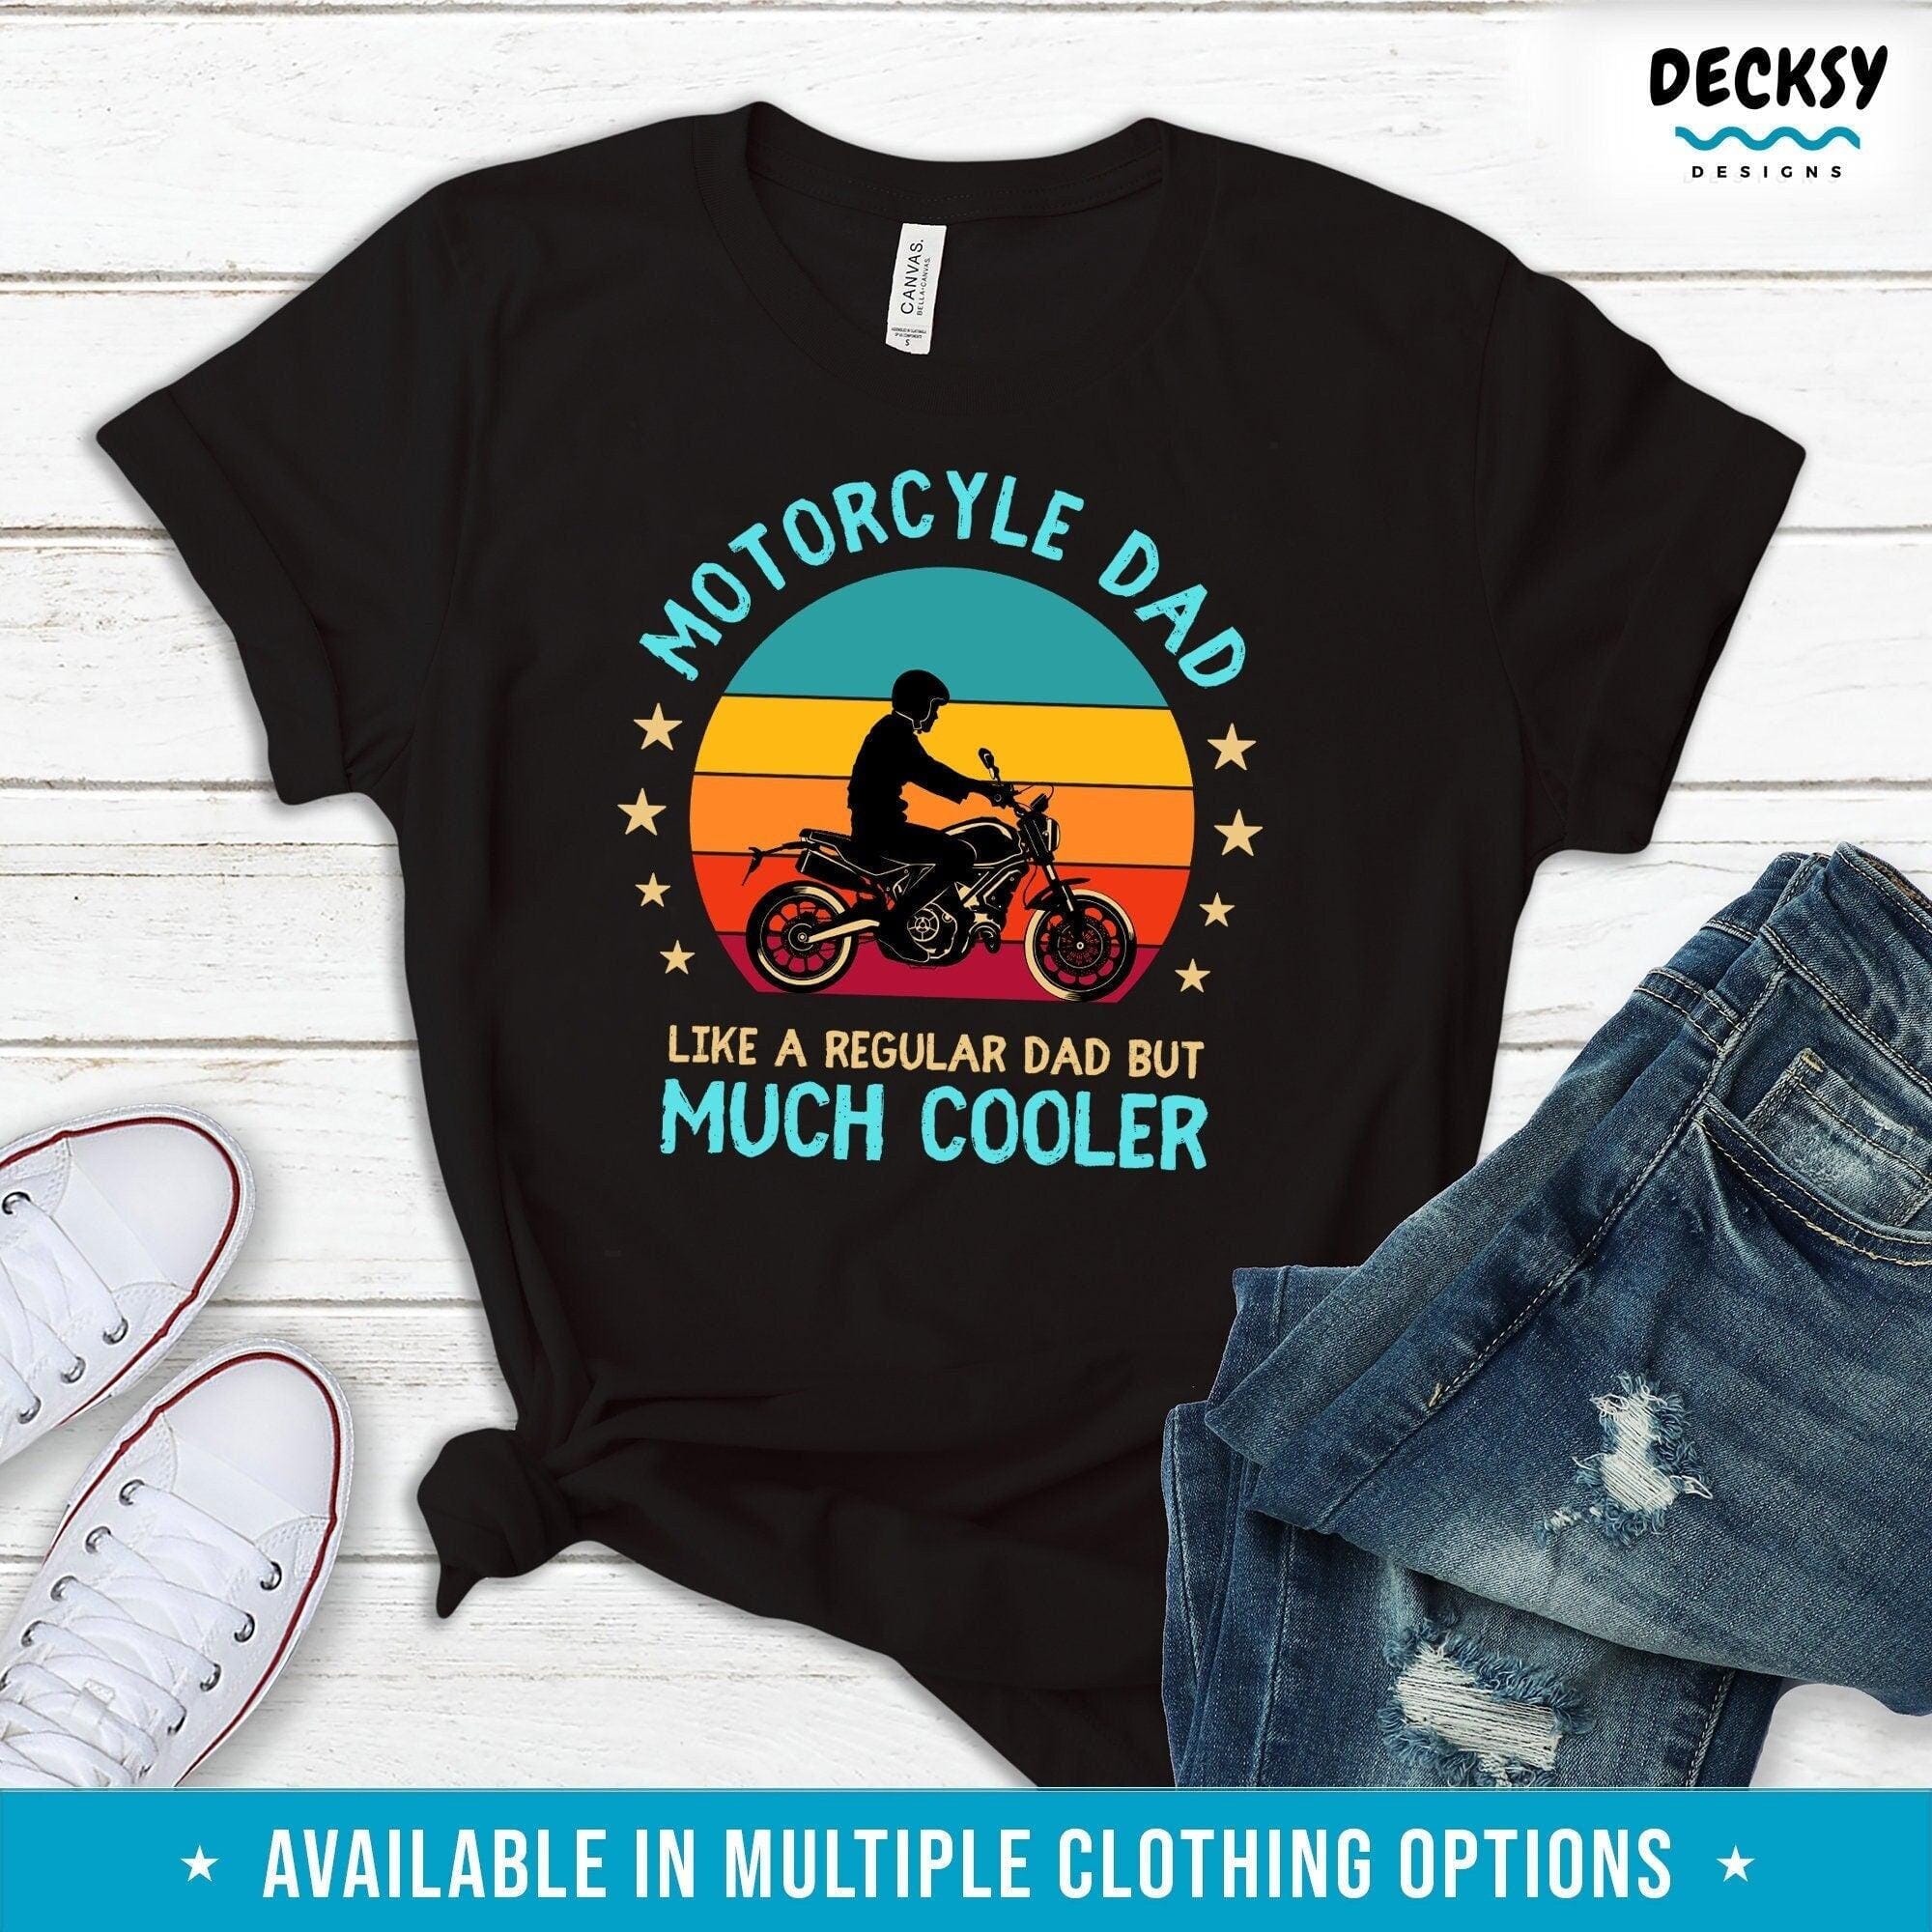 Motorcycle Dad Shirt, Motorcycle Gift For Men-Clothing:Gender-Neutral Adult Clothing:Tops & Tees:T-shirts:Graphic Tees-DecksyDesigns